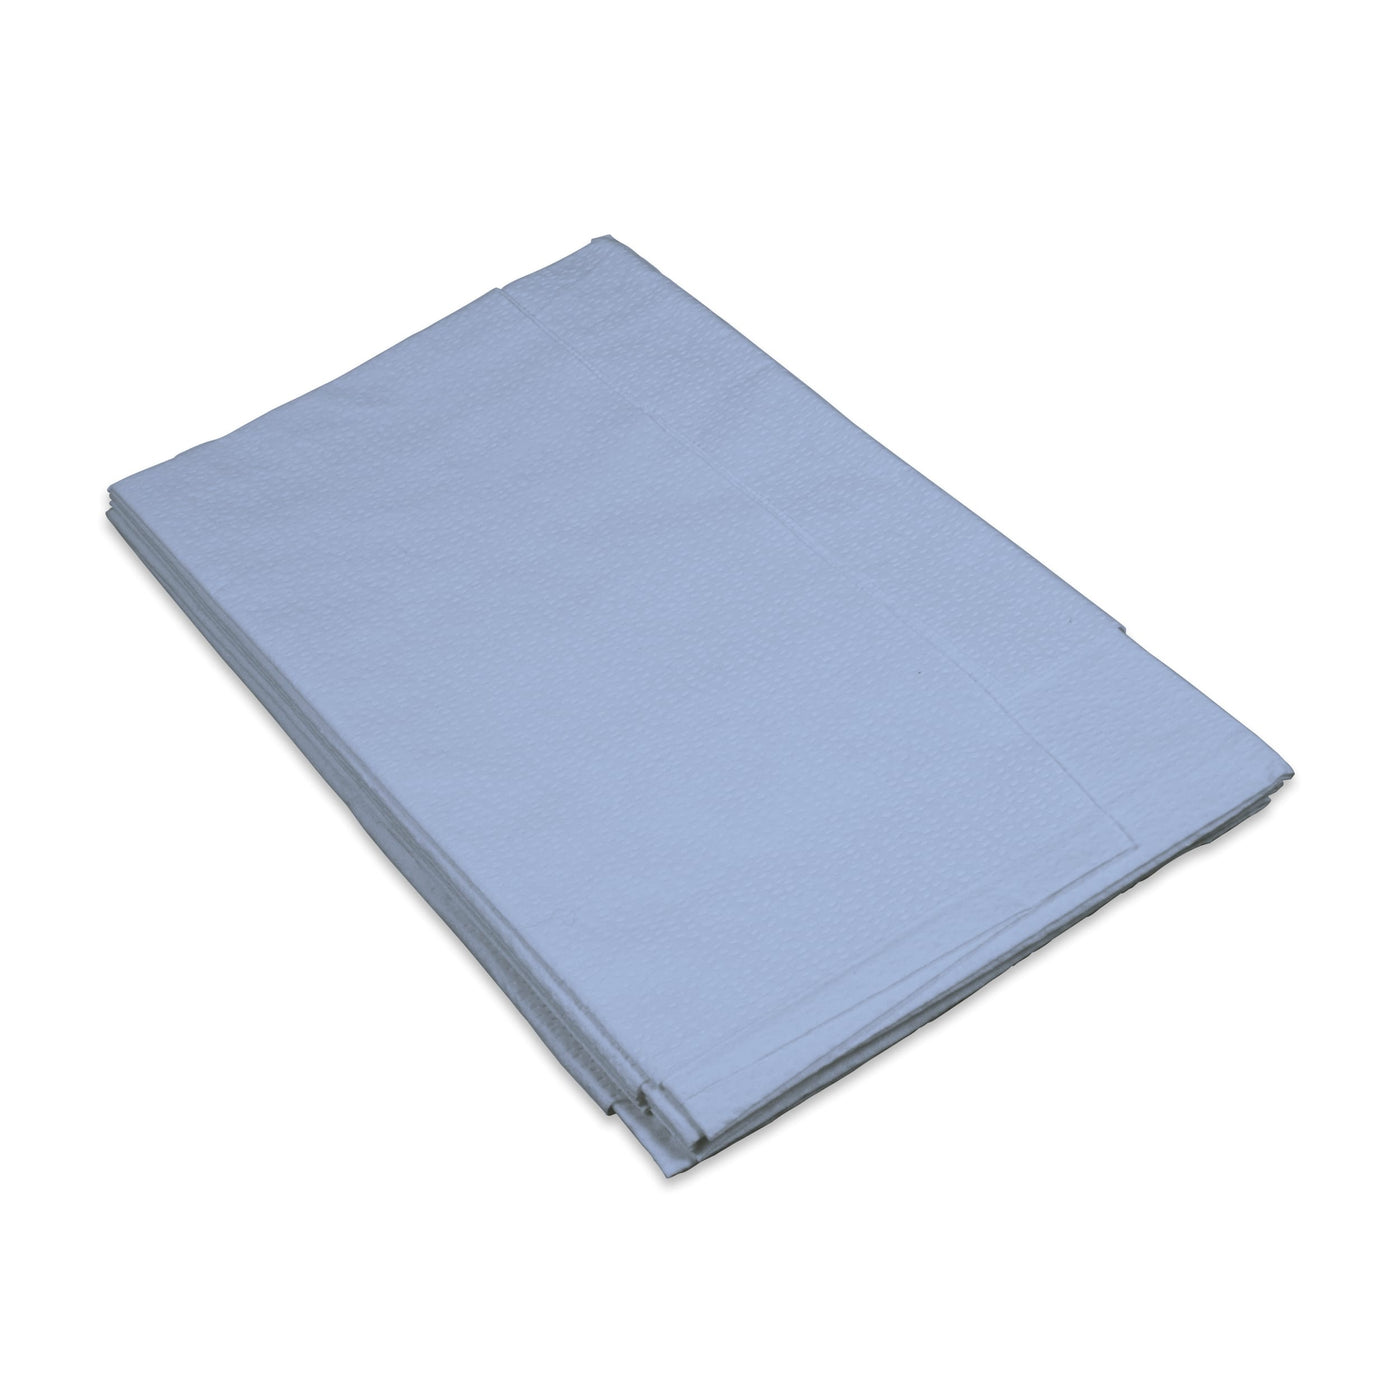 Dynarex Drape Sheets - Station Prep. & Barriers - Mithra Tattoo Supplies Canada